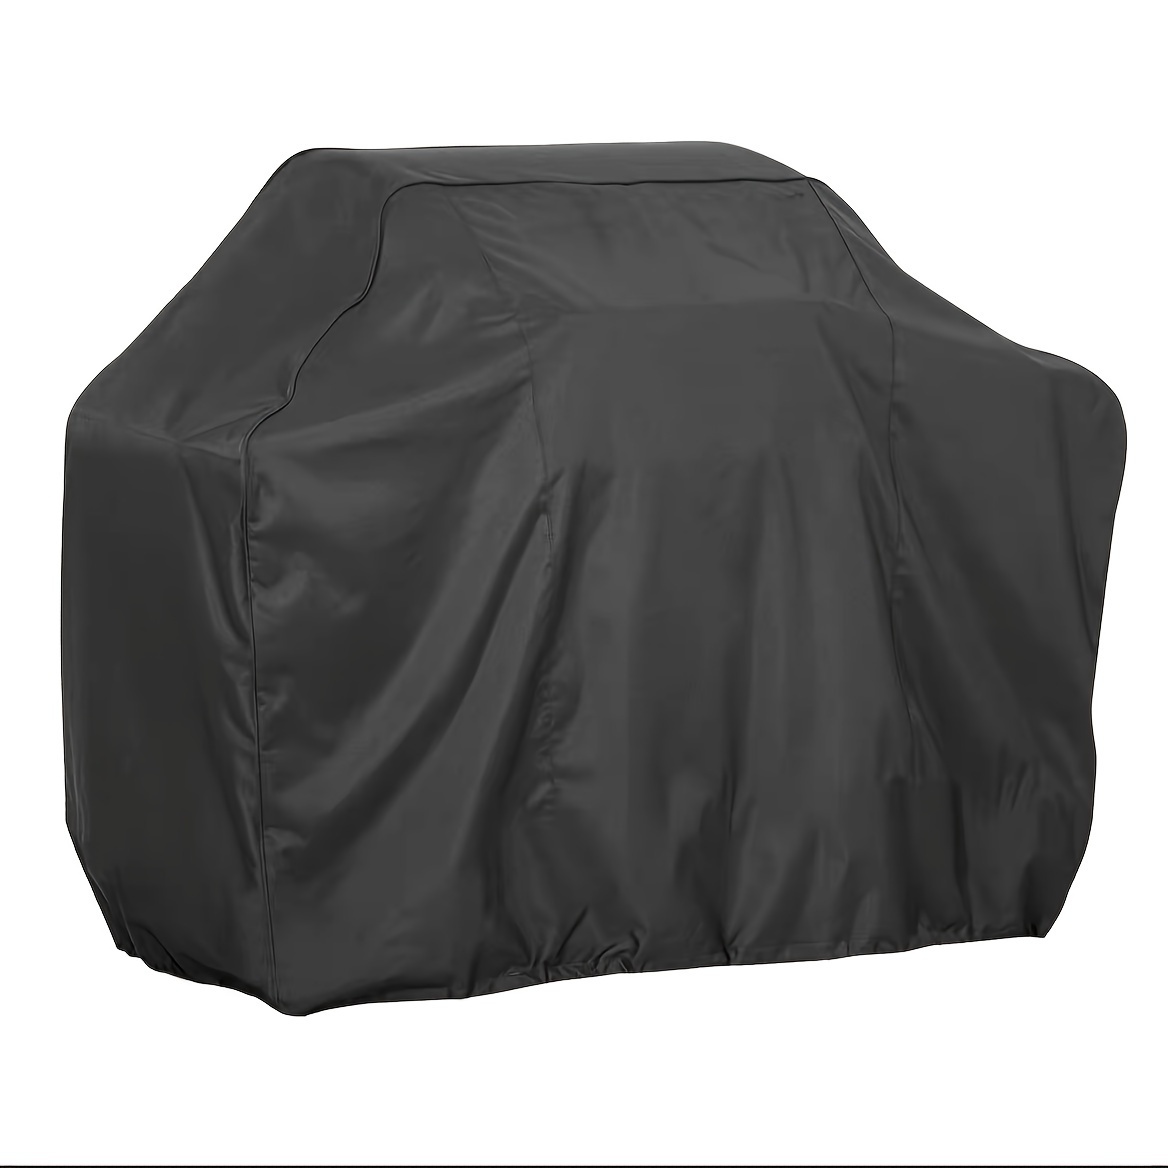 

1pc, Heavy-duty Bbq Grill Cover, Durable Pvc Material Grill Cover, Black Universal Outdoor Barbecue Cover, Tear-resistant, Uv & Dust Protection, Fits Most Grills